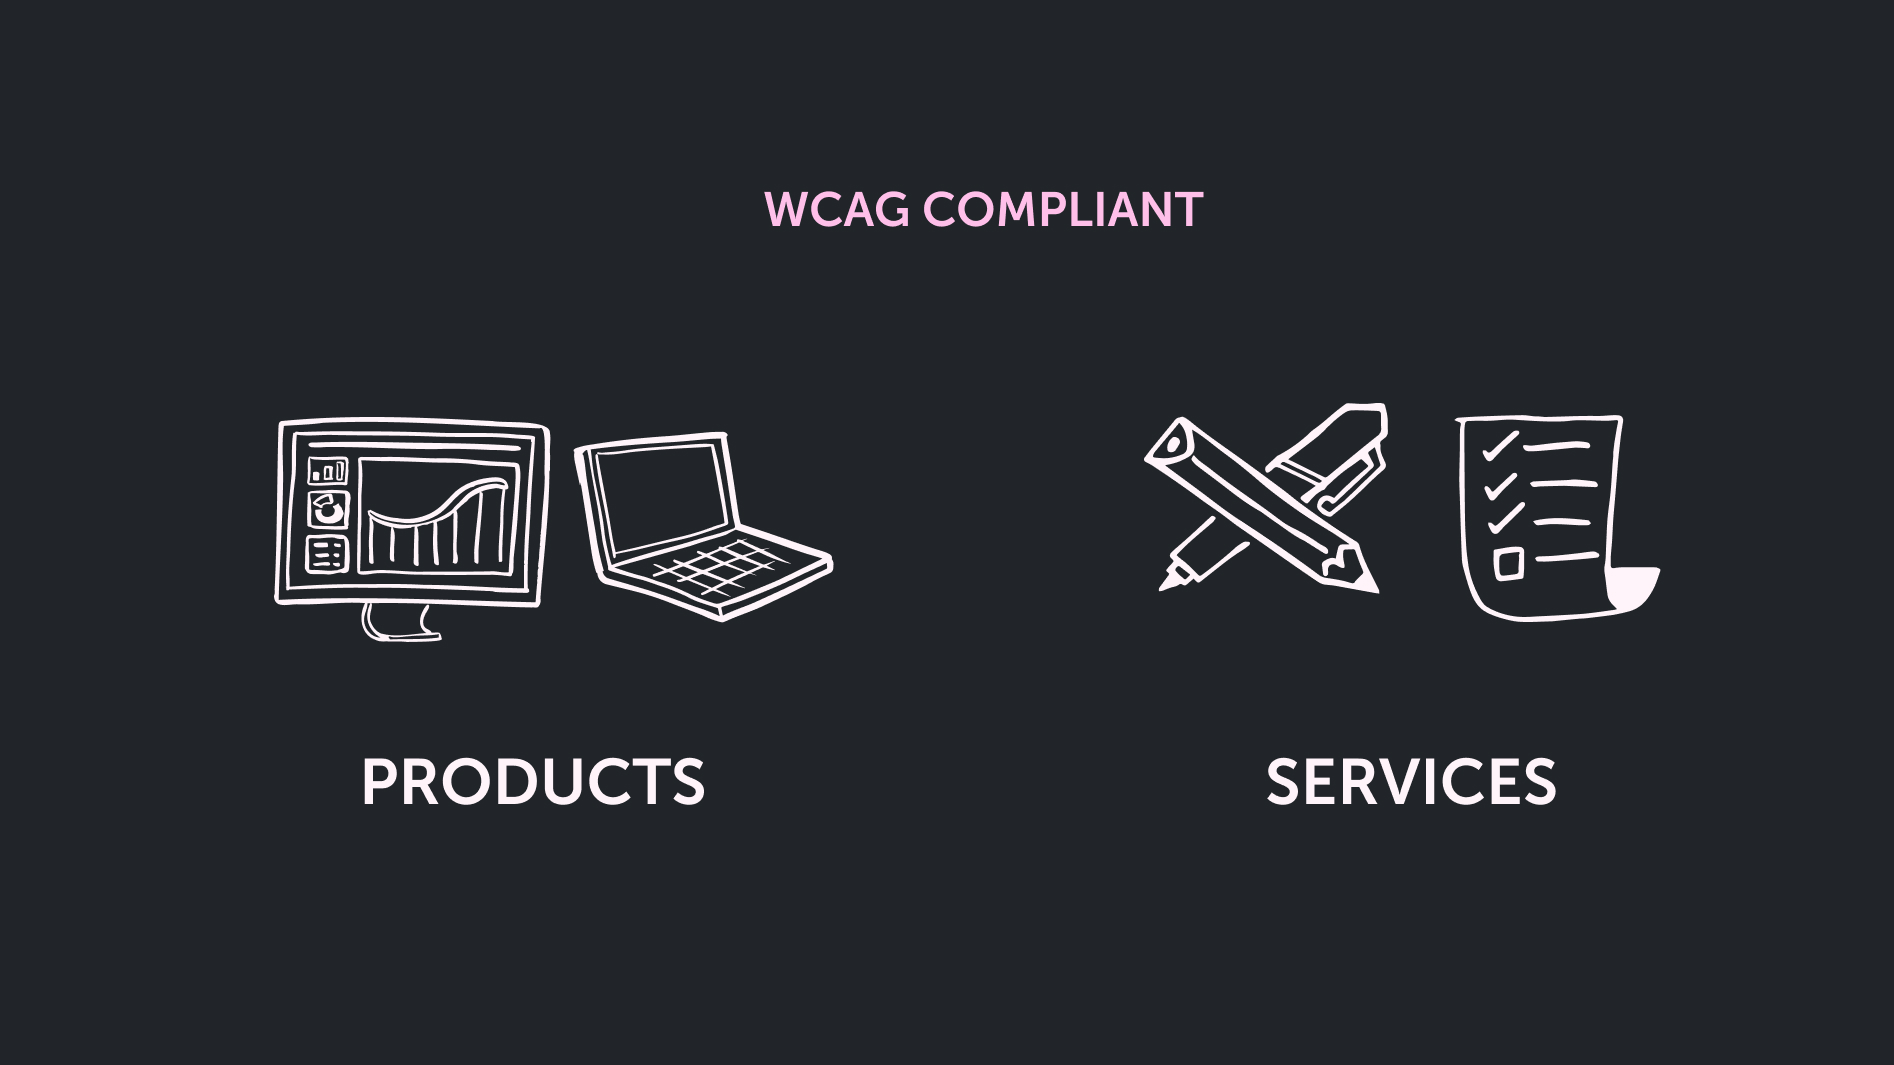 The image is divided into two sections under the heading WCAG COMPLIANT written in light pink. On the left side, labeled PRODUCTS, there are two line-drawn icons: a computer monitor displaying a graph and a laptop. On the right side, labeled SERVICES, there are three line-drawn icons: a pencil, a pen, and a checklist with check marks. The background is dark, and all illustrations and text are in white, maintaining a minimalist and monochromatic style.